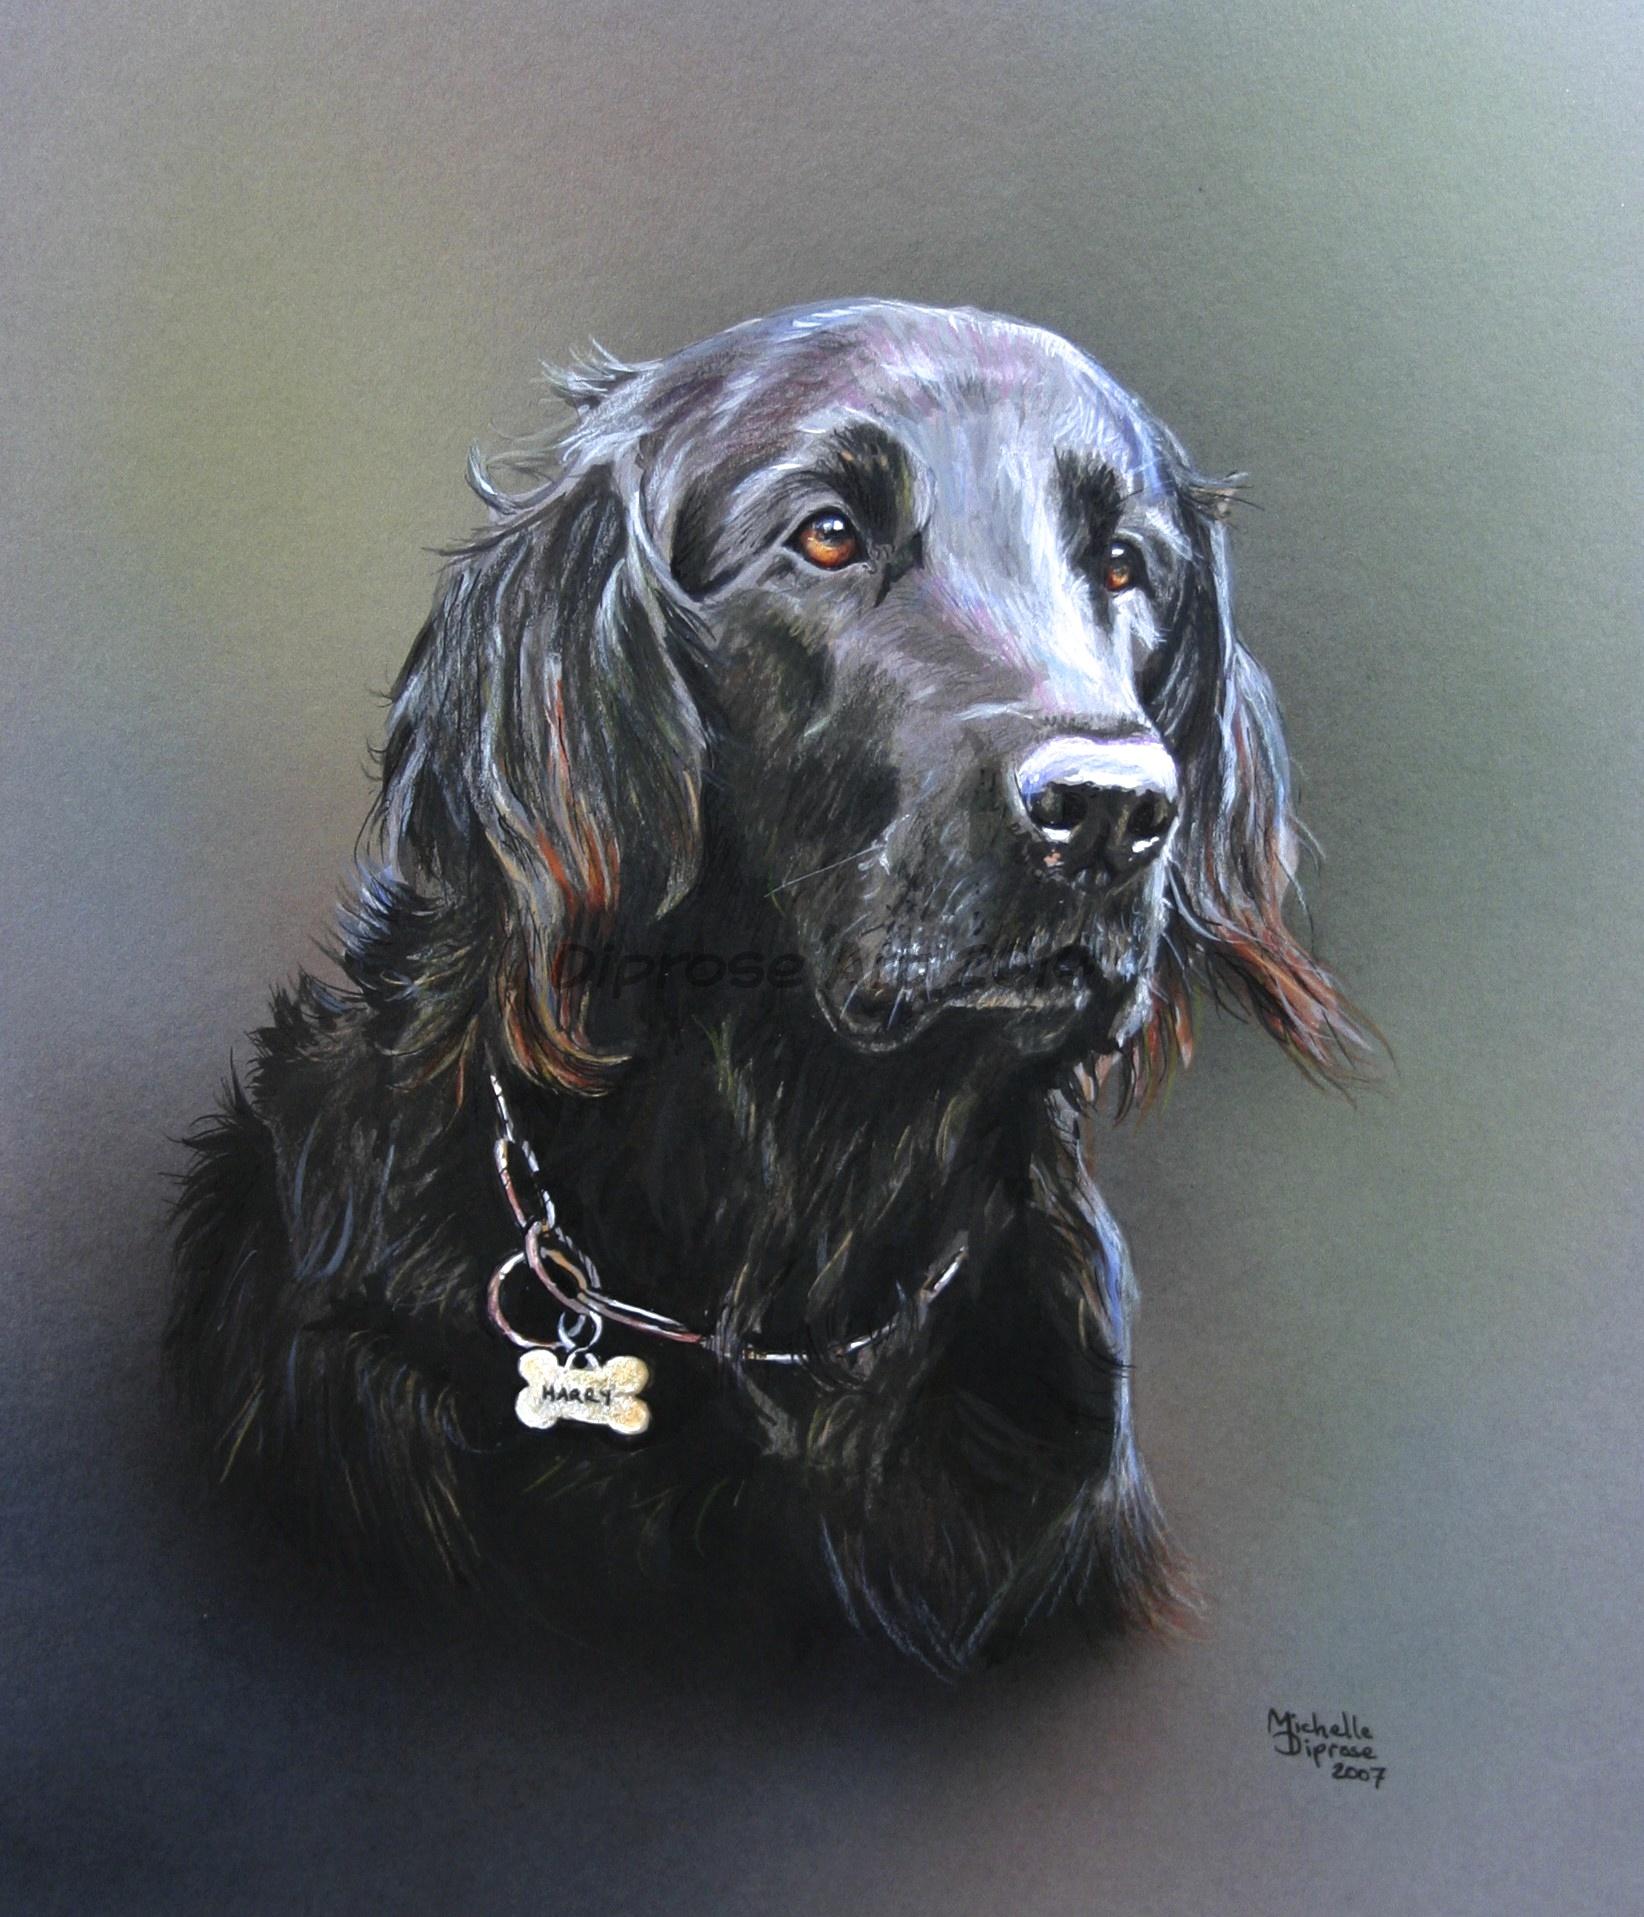 Mixed media on board - approx A4 - Harry was a very special dog who I knew very well and was friends with my old boy.  He was also a very handsome Flatcoat with a lovely kind nature.